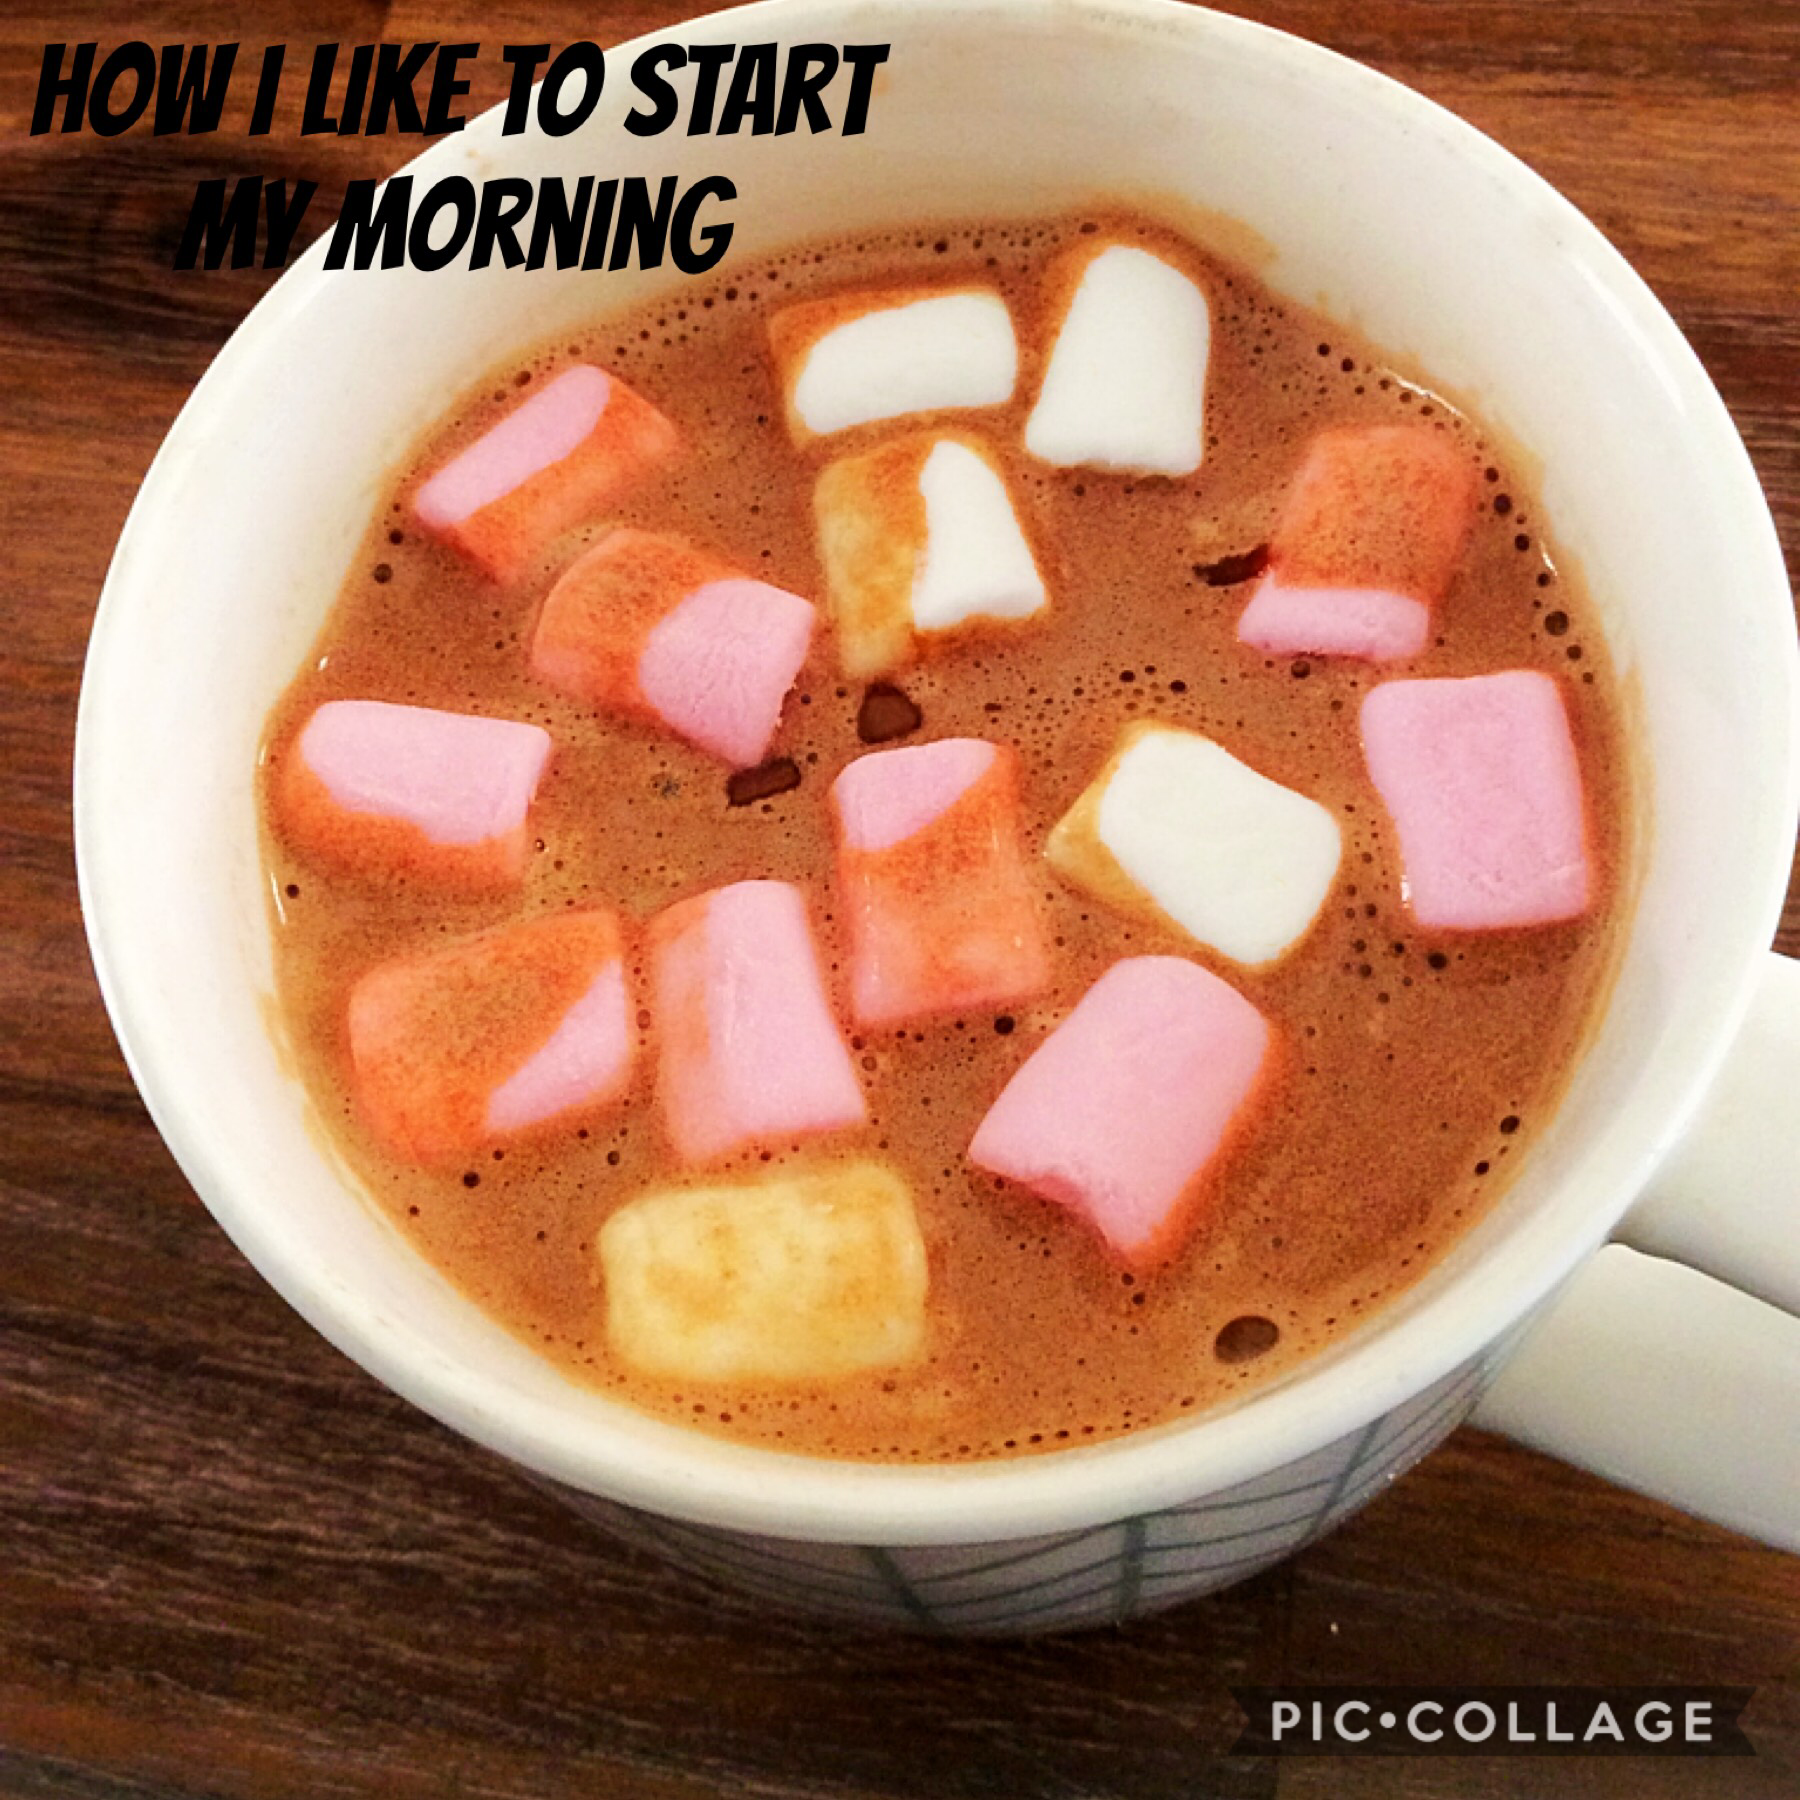 Hot chocolate with extra whipped cream and double marshmallows